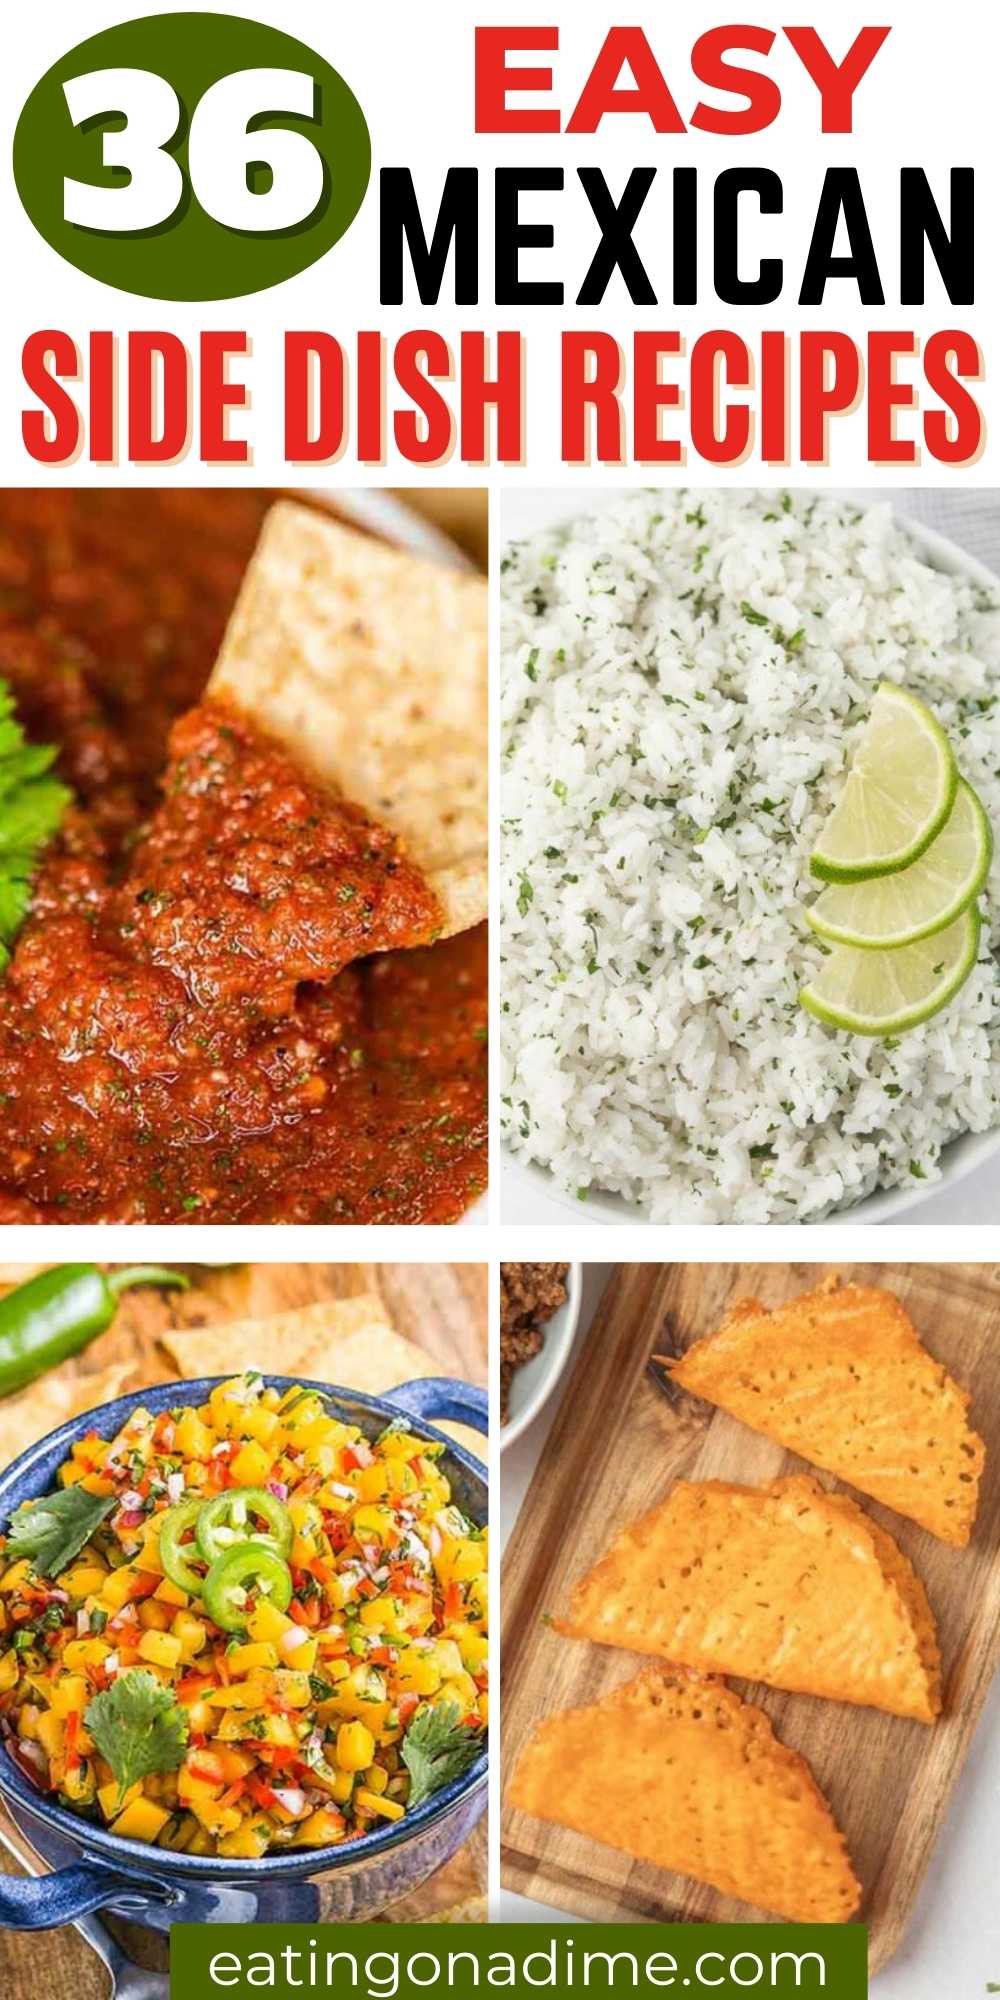 The Best Mexican Side Dishes you need to try. 36 easy Mexican Sides to serve with tacos, enchiladas and more. These simple and quick Mexican Side Dish Recipes are perfect for Taco Tuesday or for potlucks too. You’ll love this easy side dishes. #eatingonadime #sidedishes #sidedishrecipes #mexicanrecipes 